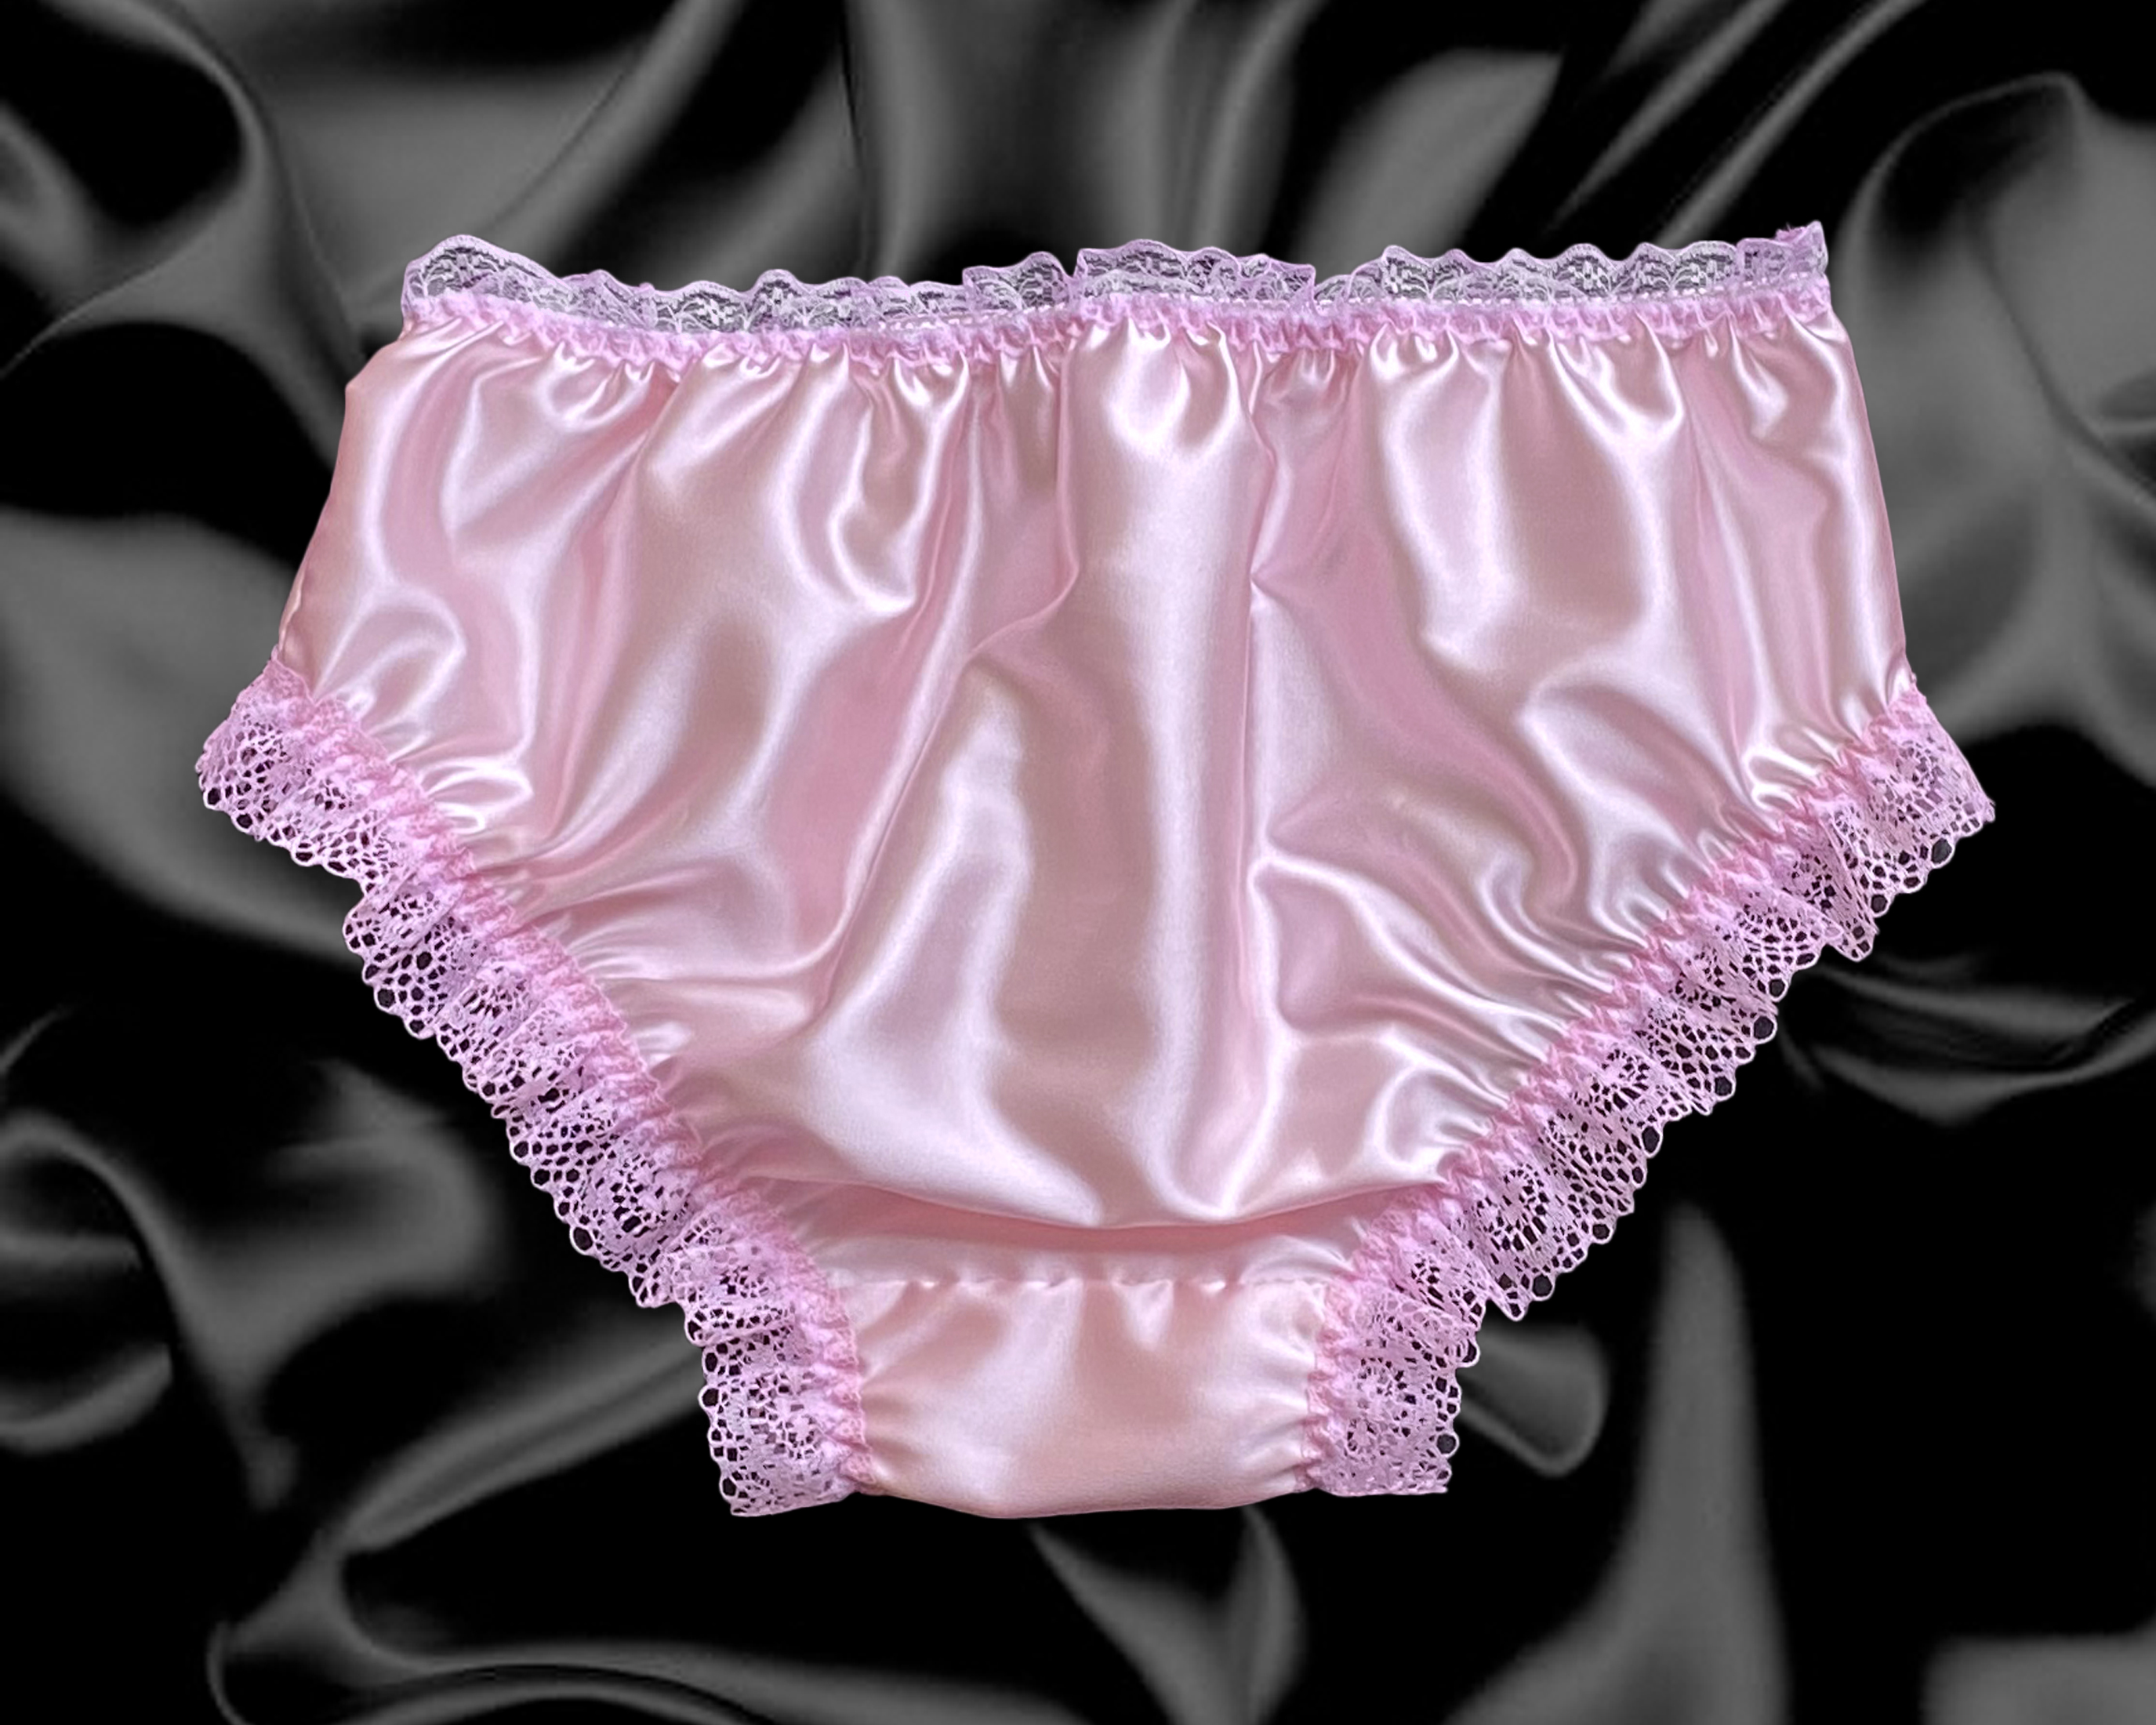 Baby Pink Satin Frilly Lace Trim Sissy Panties Knicker Briefs Size 10-20